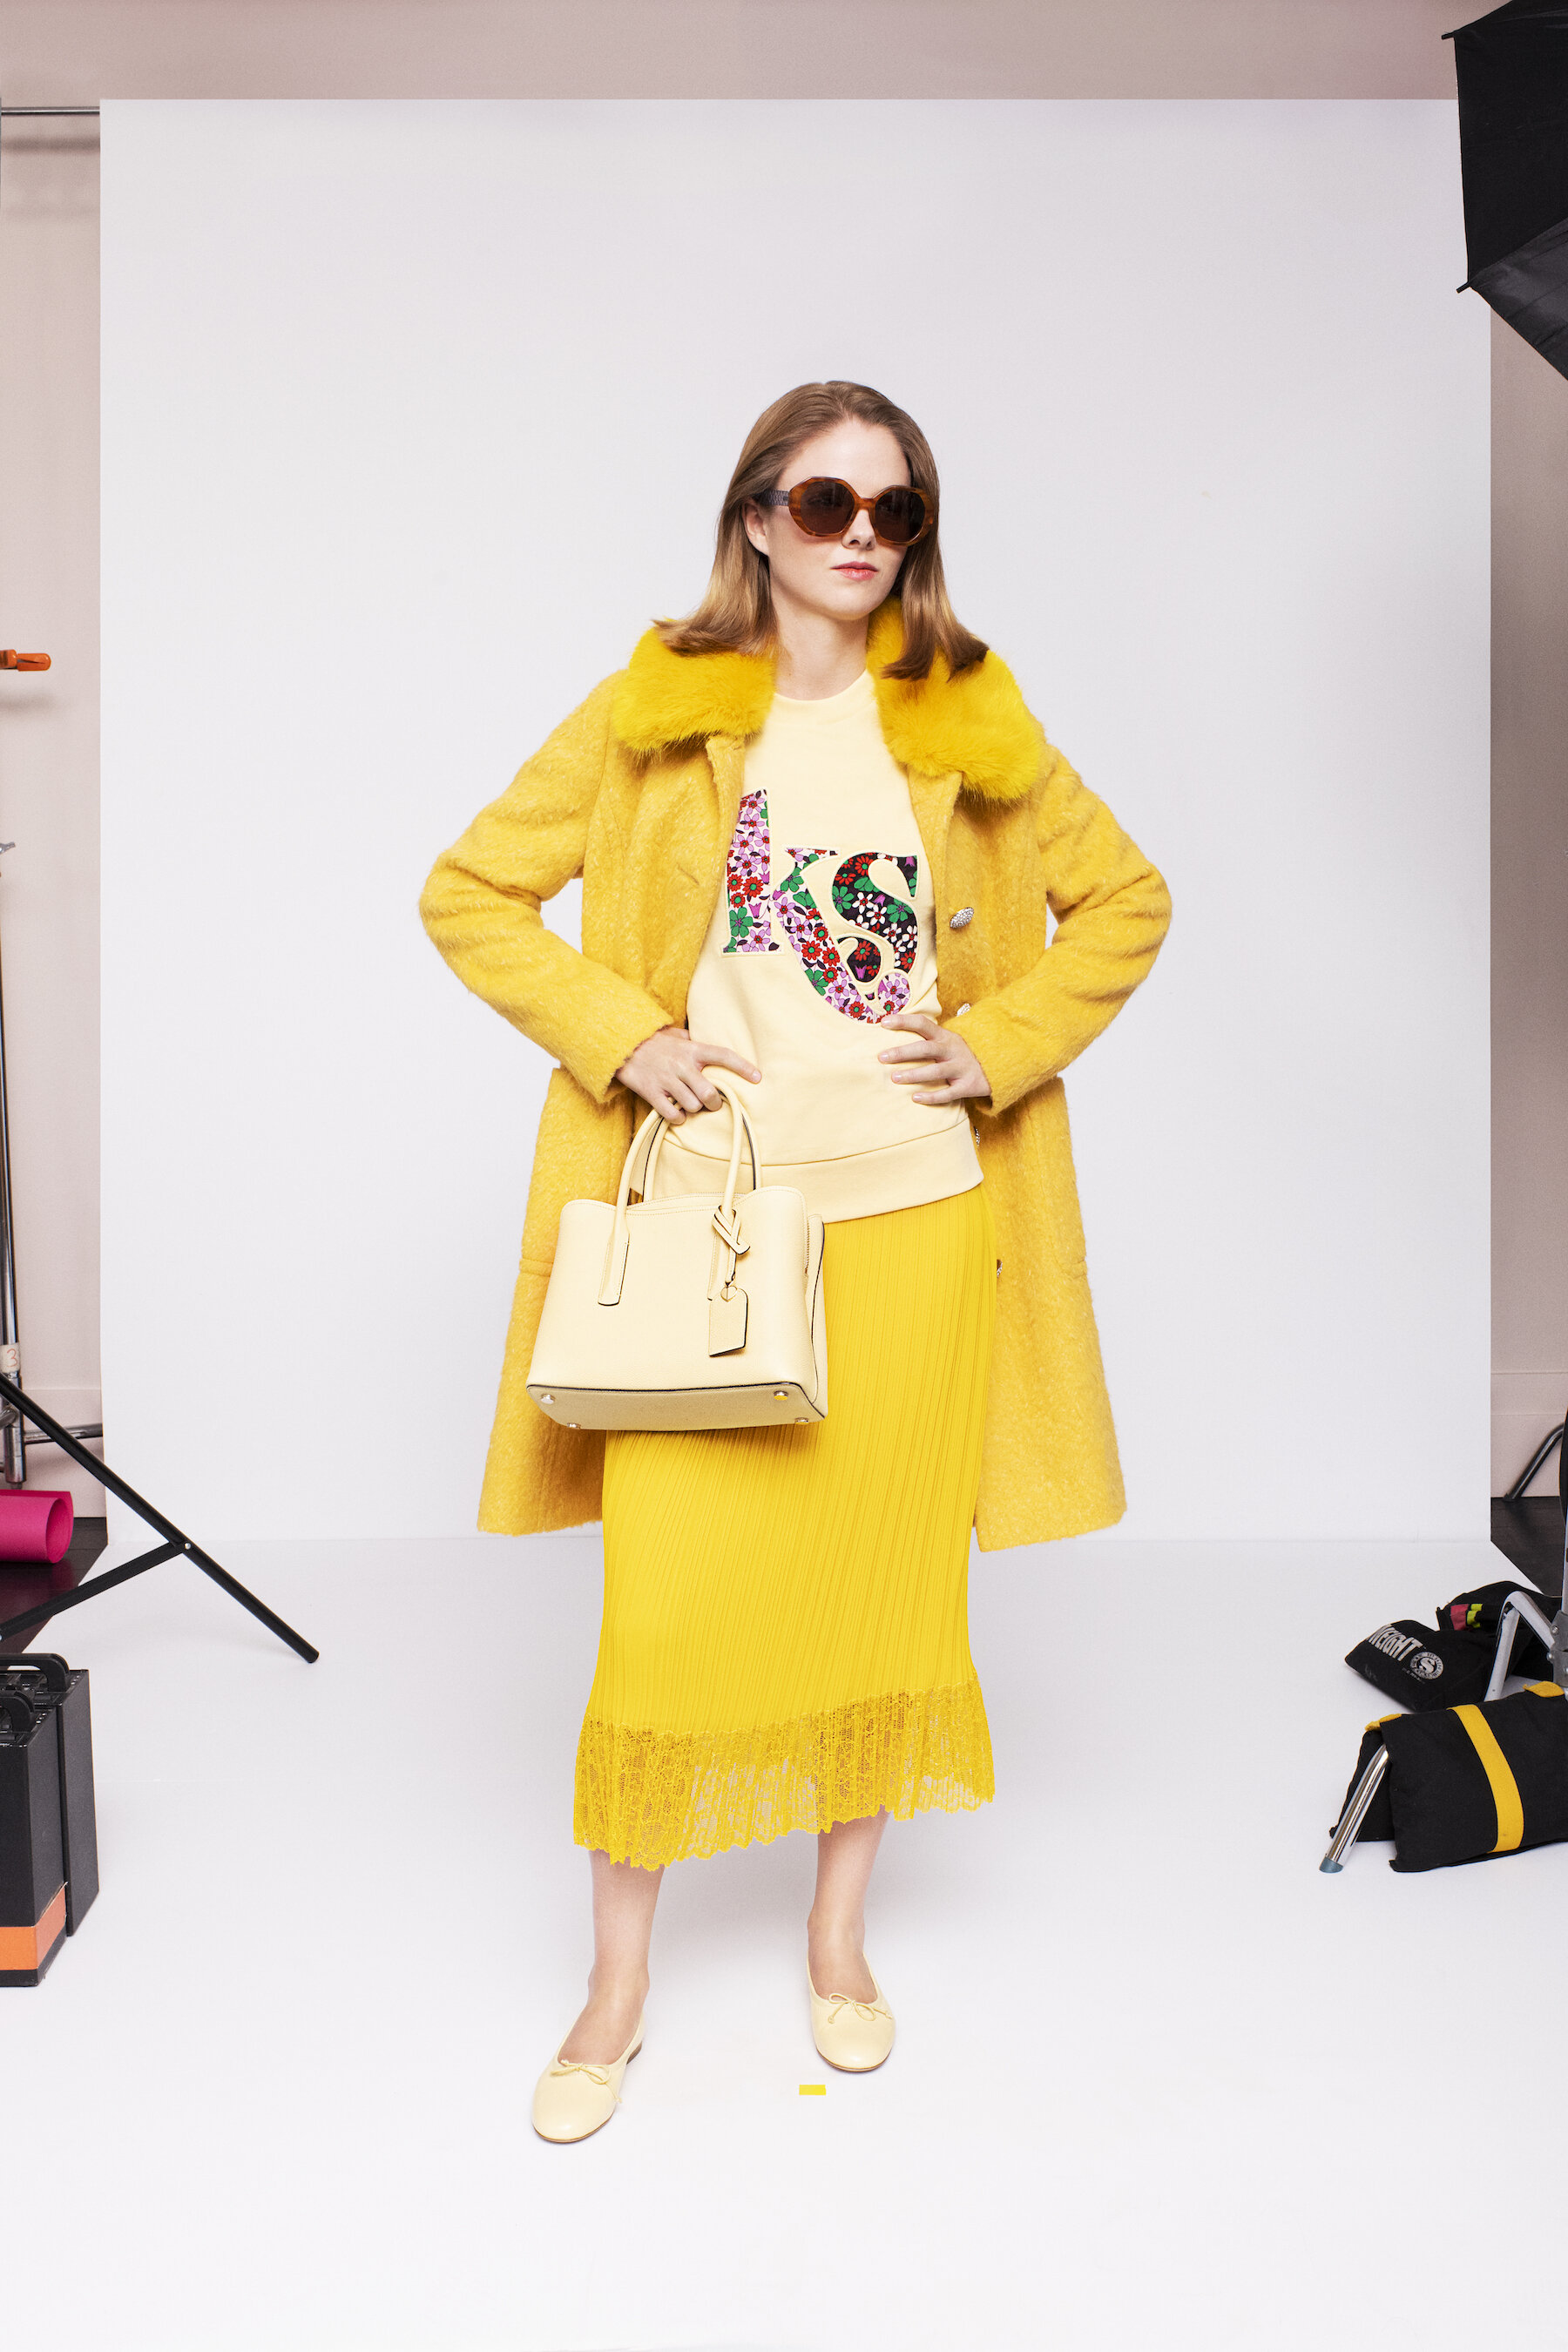 Kate Spade New York Fall 2022 Collection — SSI Life